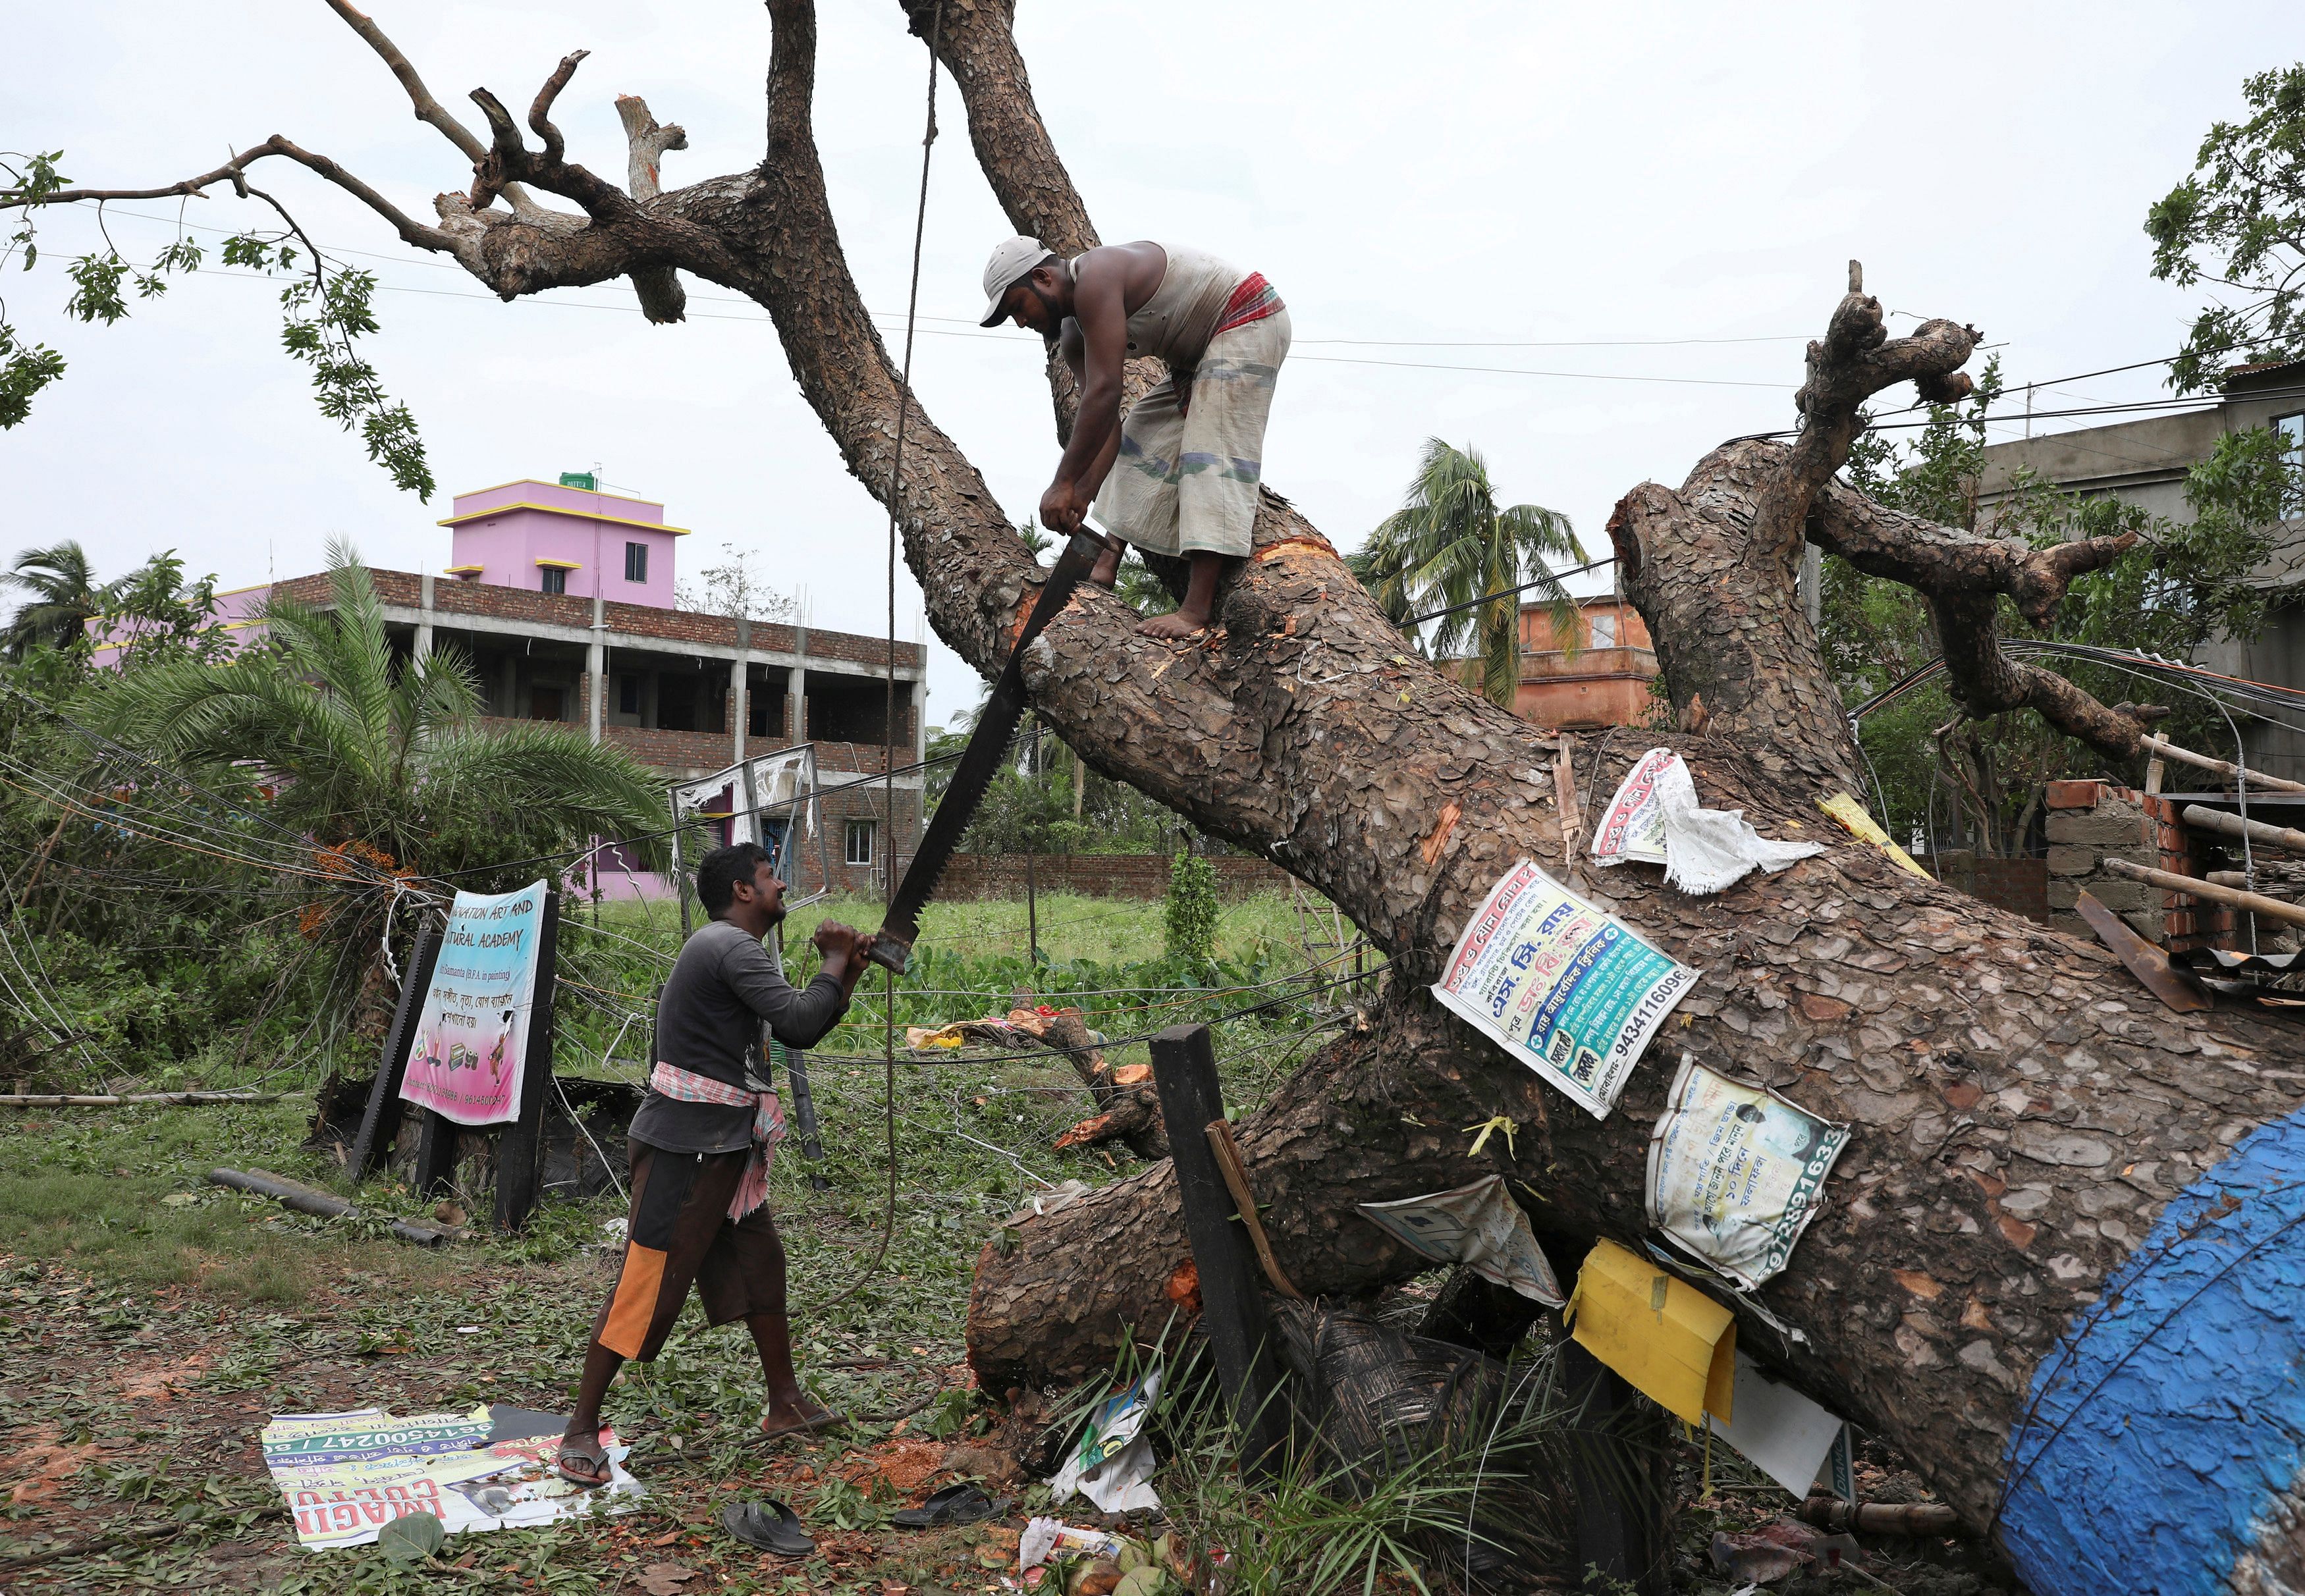 Men cut branches of an uprooted tree in the aftermath of Cyclone Amphan, in South 24 Parganas district in the eastern state of West Bengal, India, May 22, 2020. (REUTERS Photo)